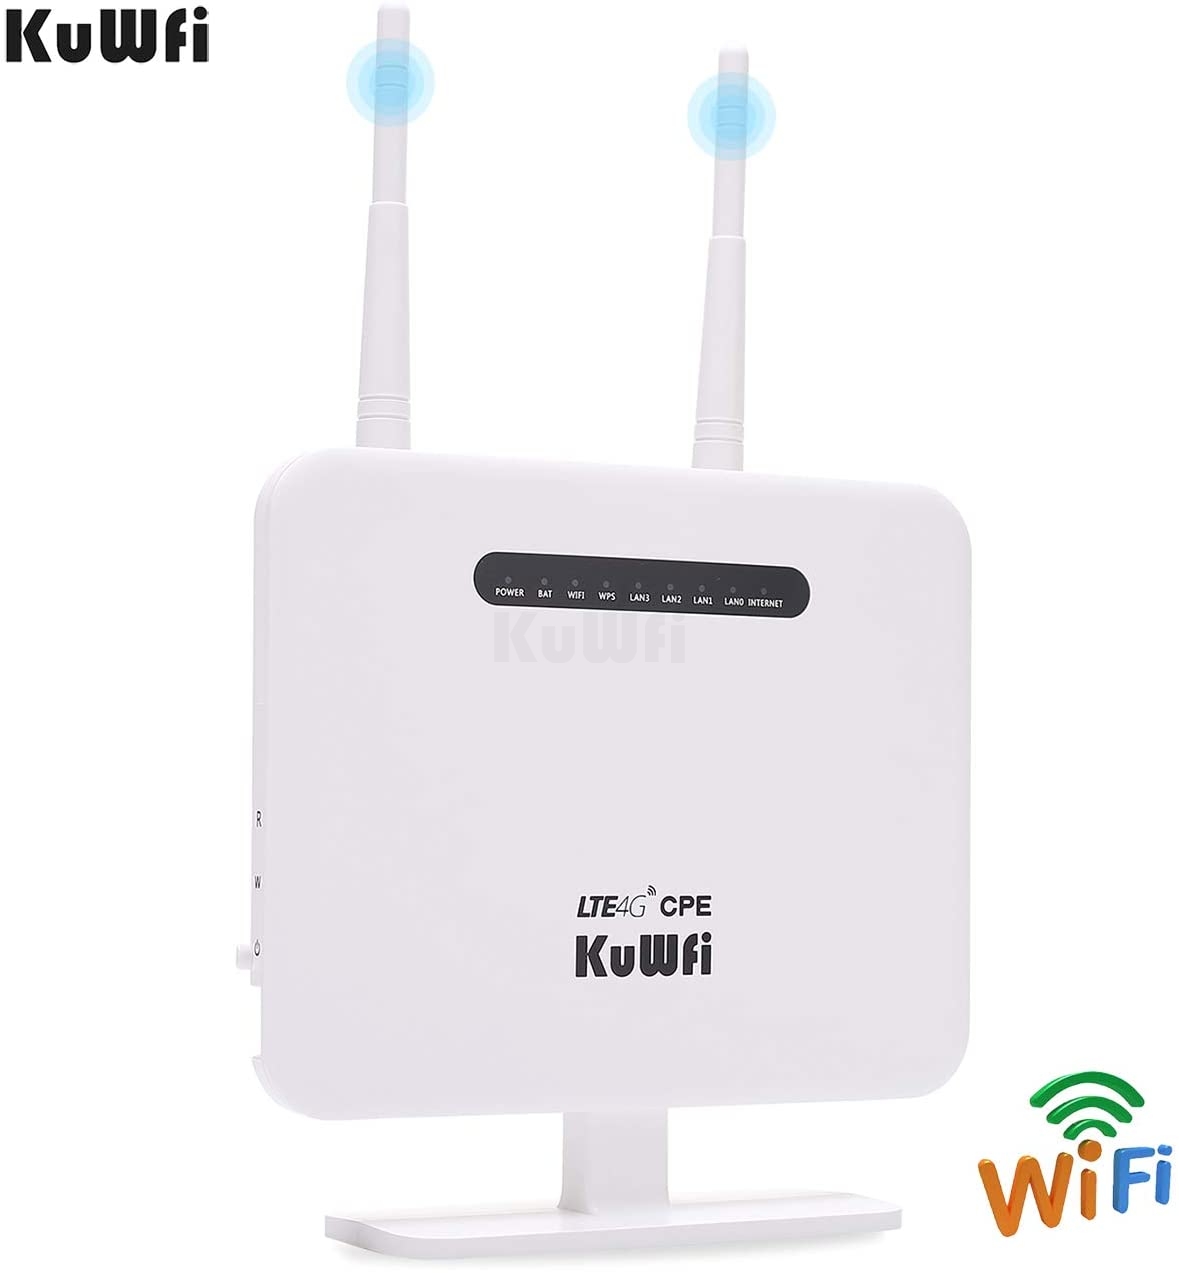 KuWFi LTE Mobile WiFi Hotspot Unlocked Travel Wireless 4G Router with SIM Card Support B1/B3/B5/B7/B8/B20 with Home/Office